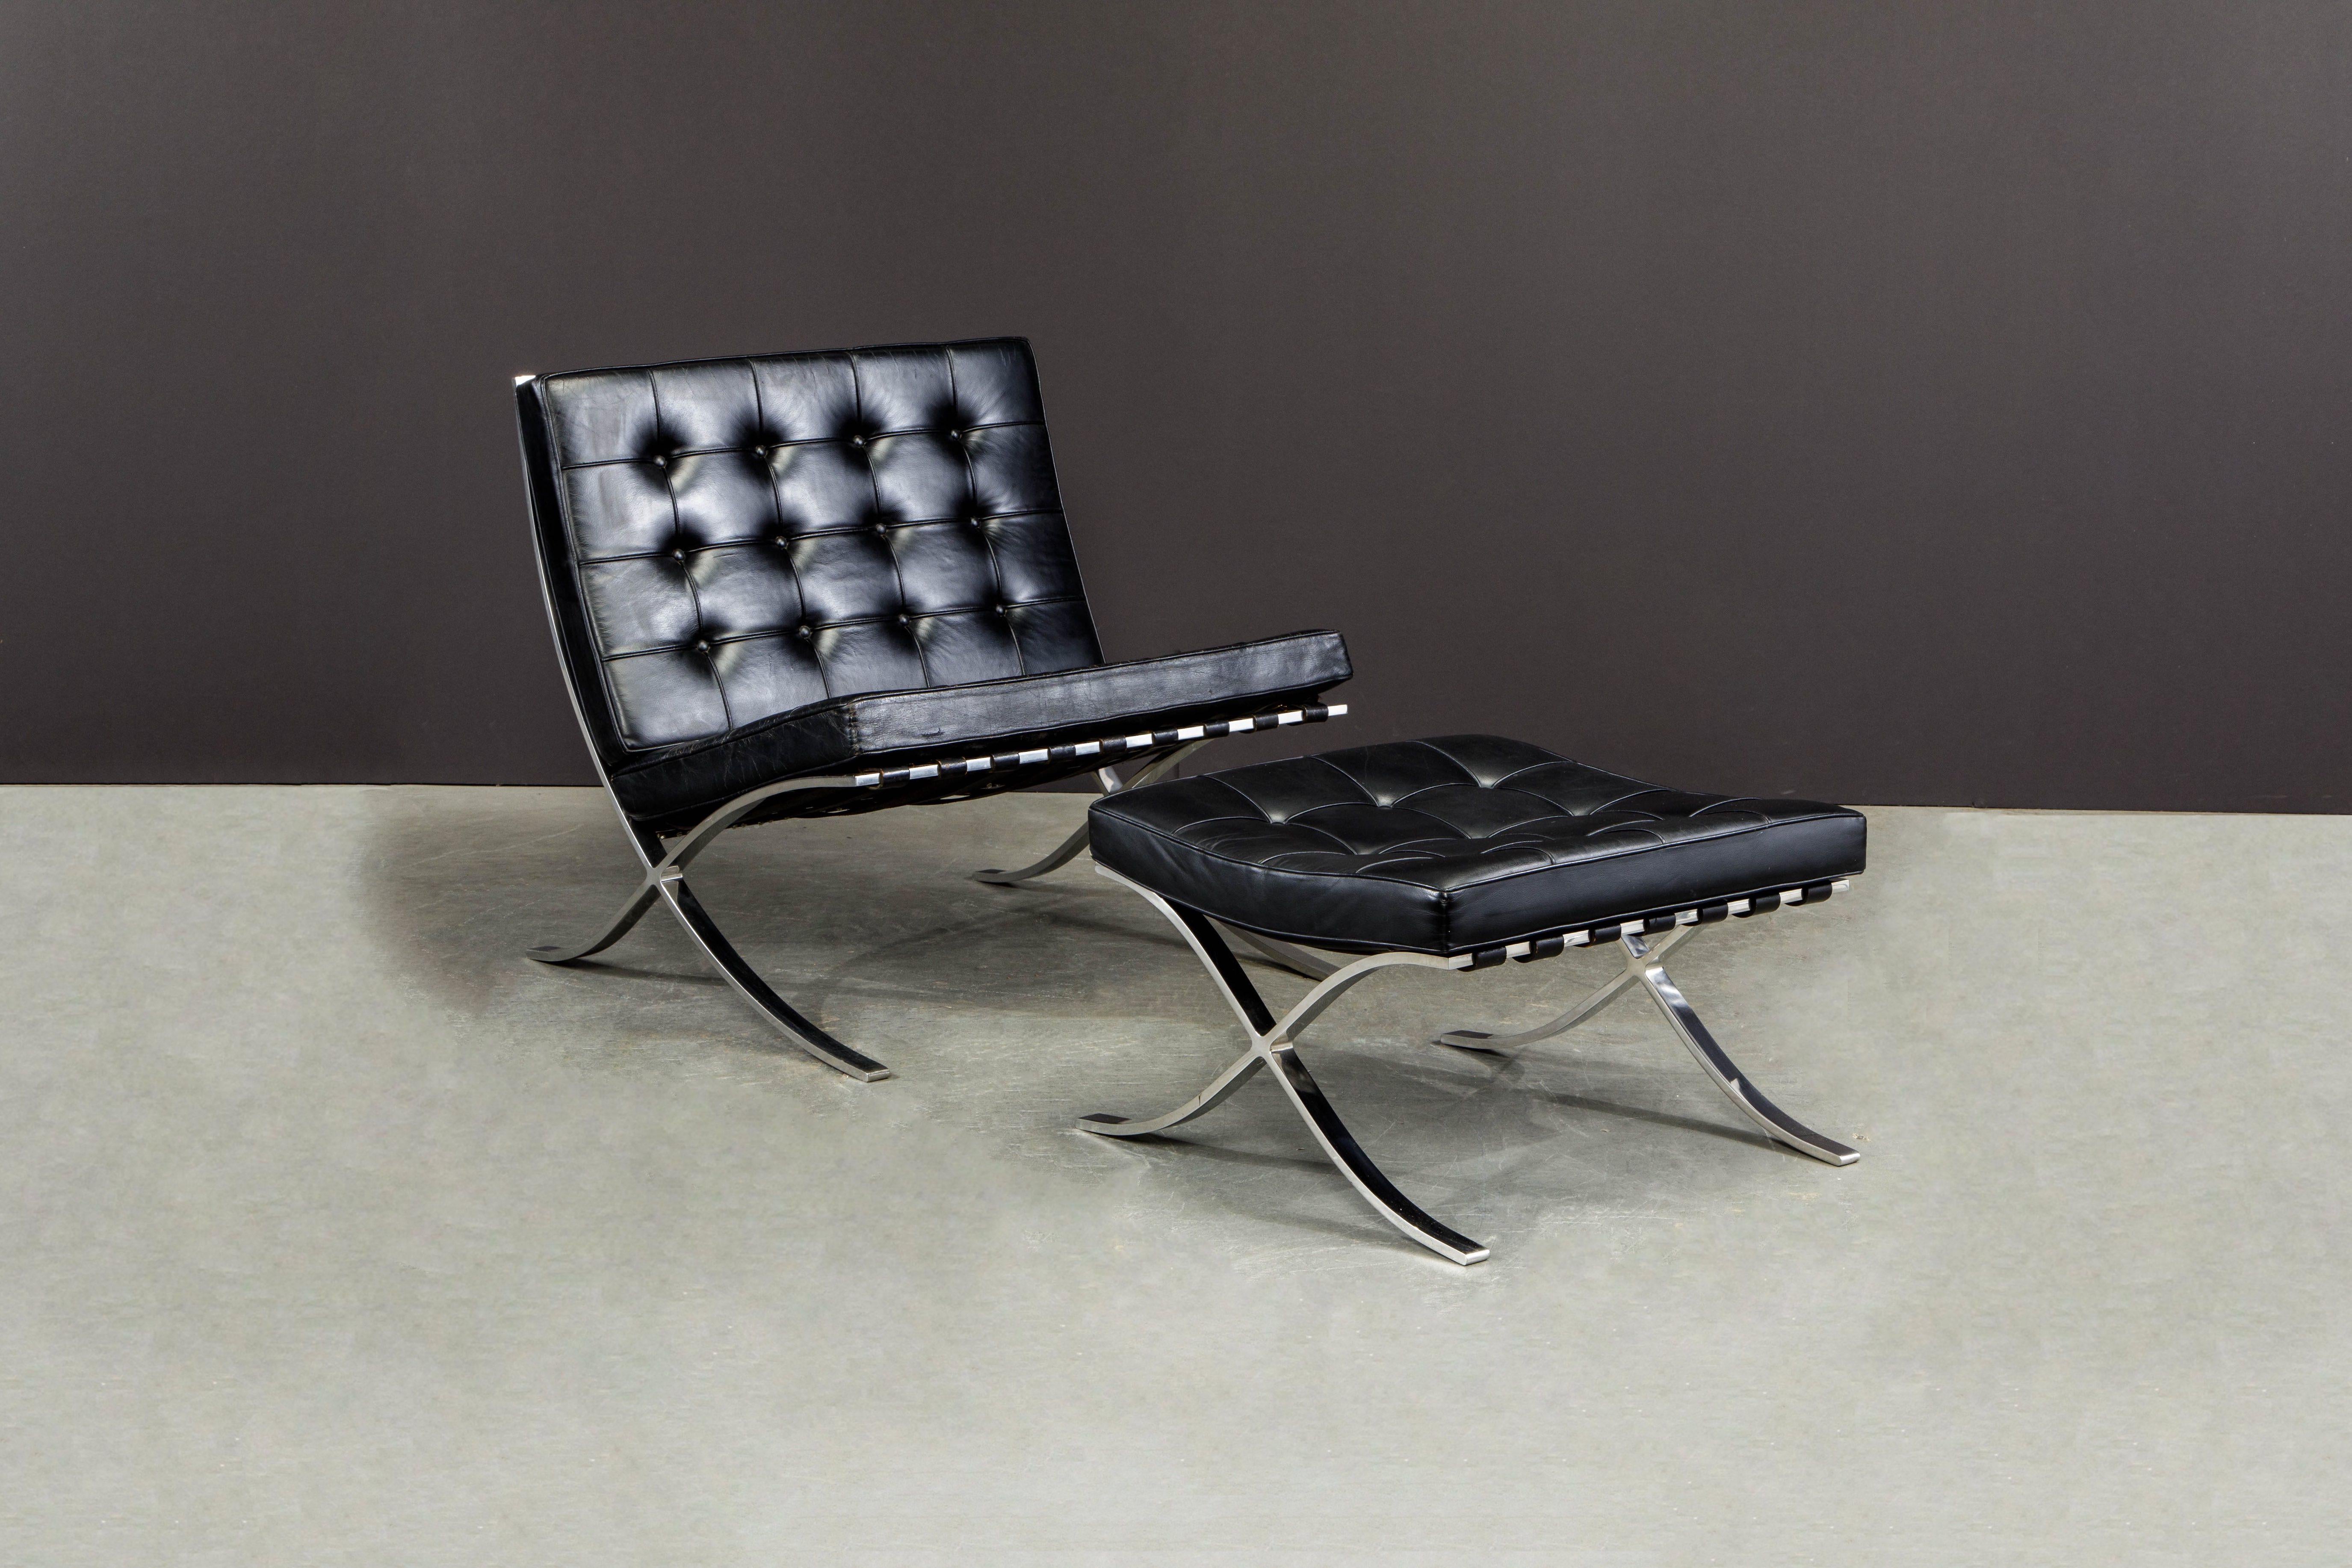 This listing is for a highly sought-after-by-collectors 'Original 1st Generation Production' set of Knoll Associates (signed) Barcelona chair and ottoman by Ludwig Mies van der Rohe, circa 1961, in original black leather and matching original